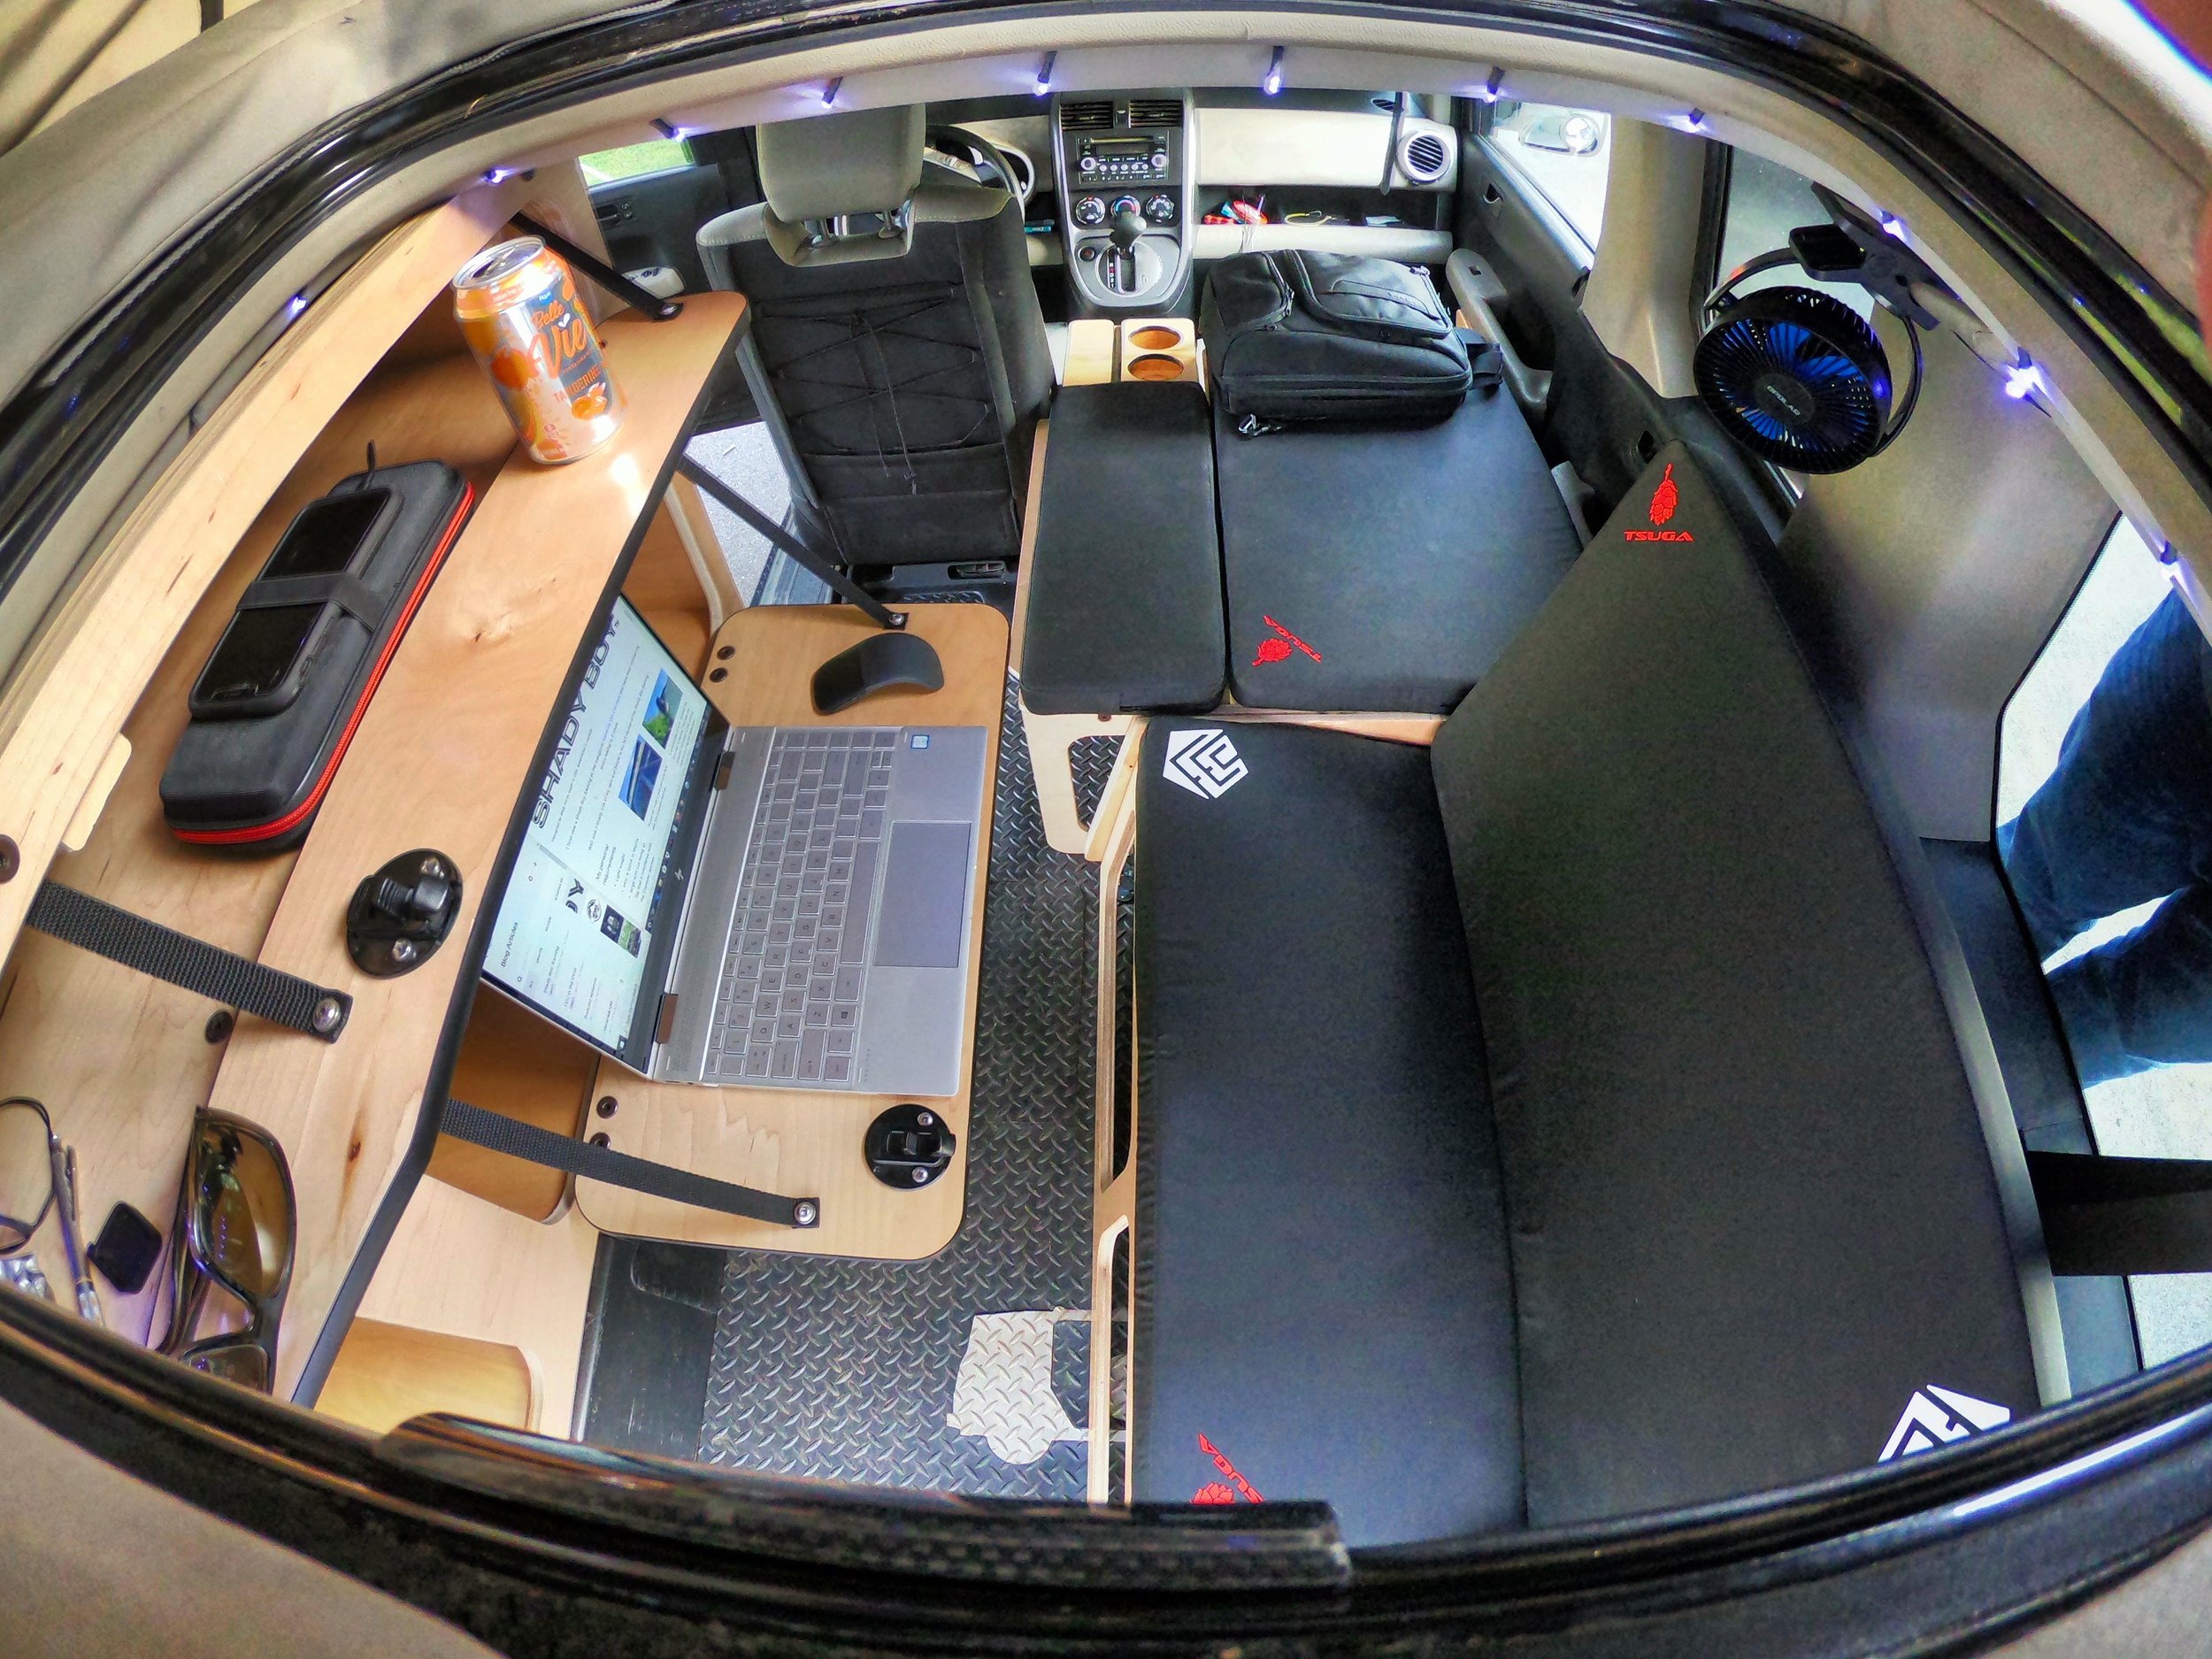  When used in combination with the Bench it creates the perfect mobile office. 